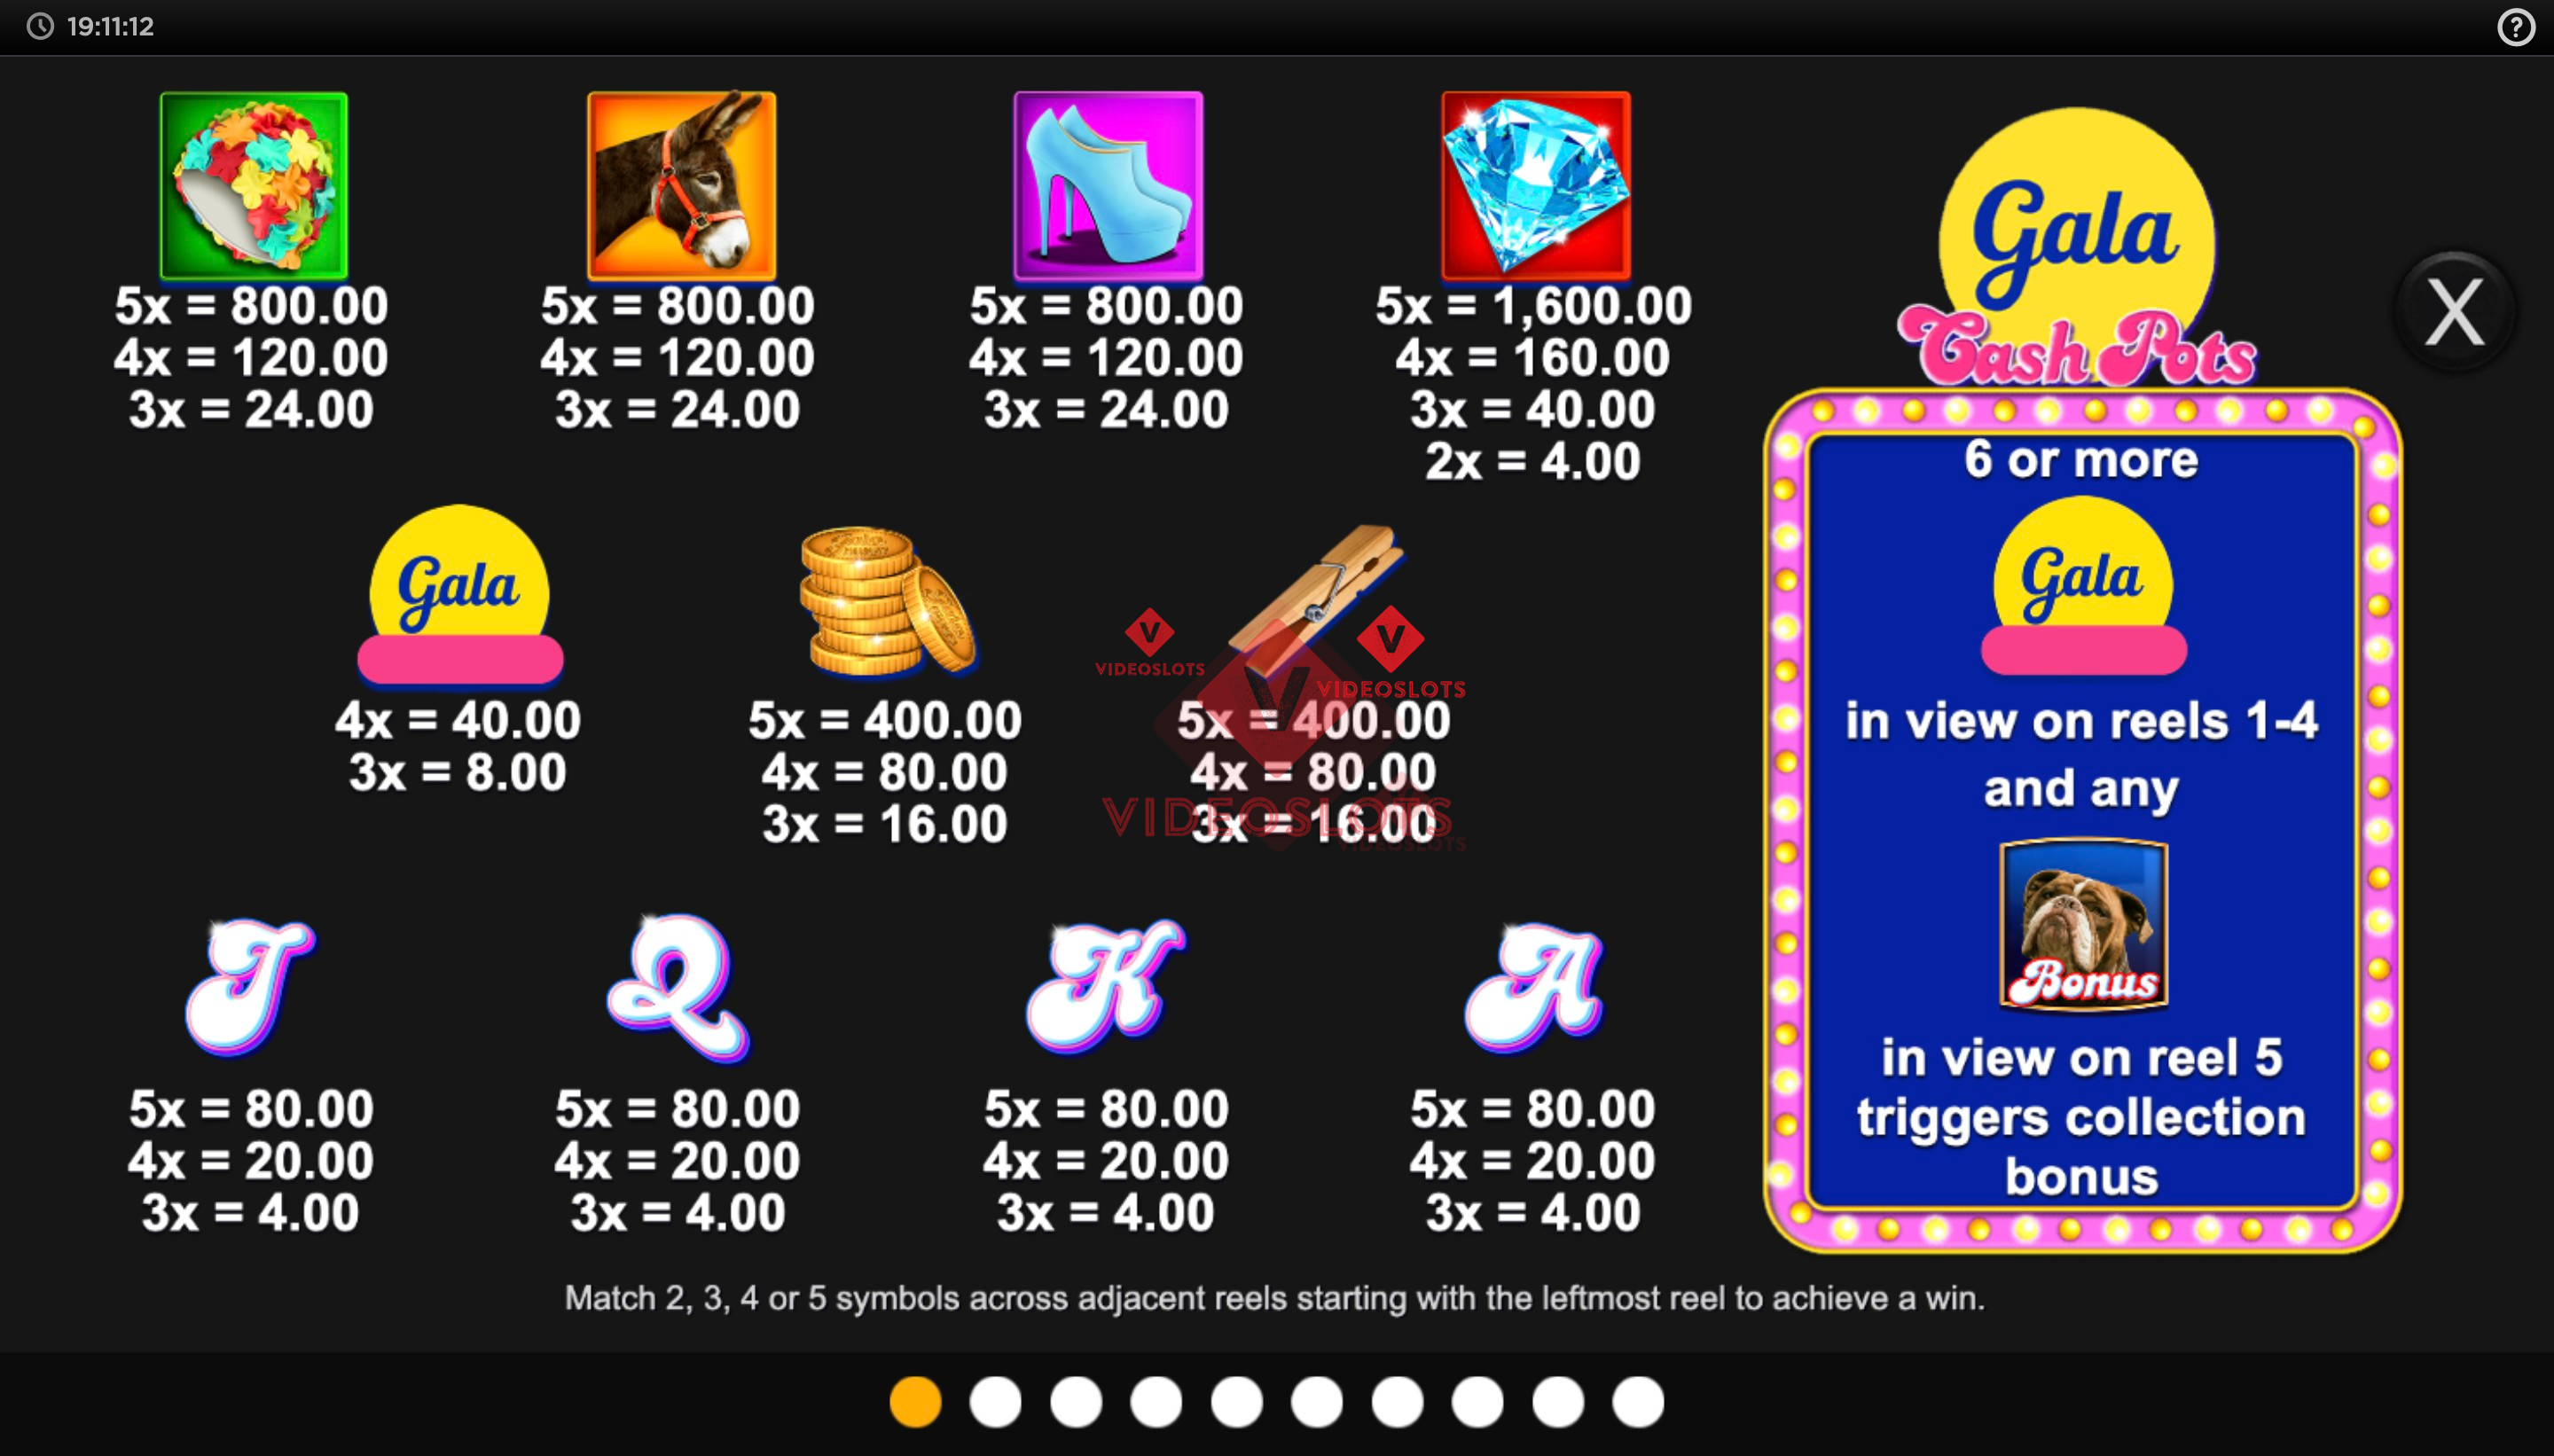 Pay Table for Gala Cashpots slot from Inspired Gaming